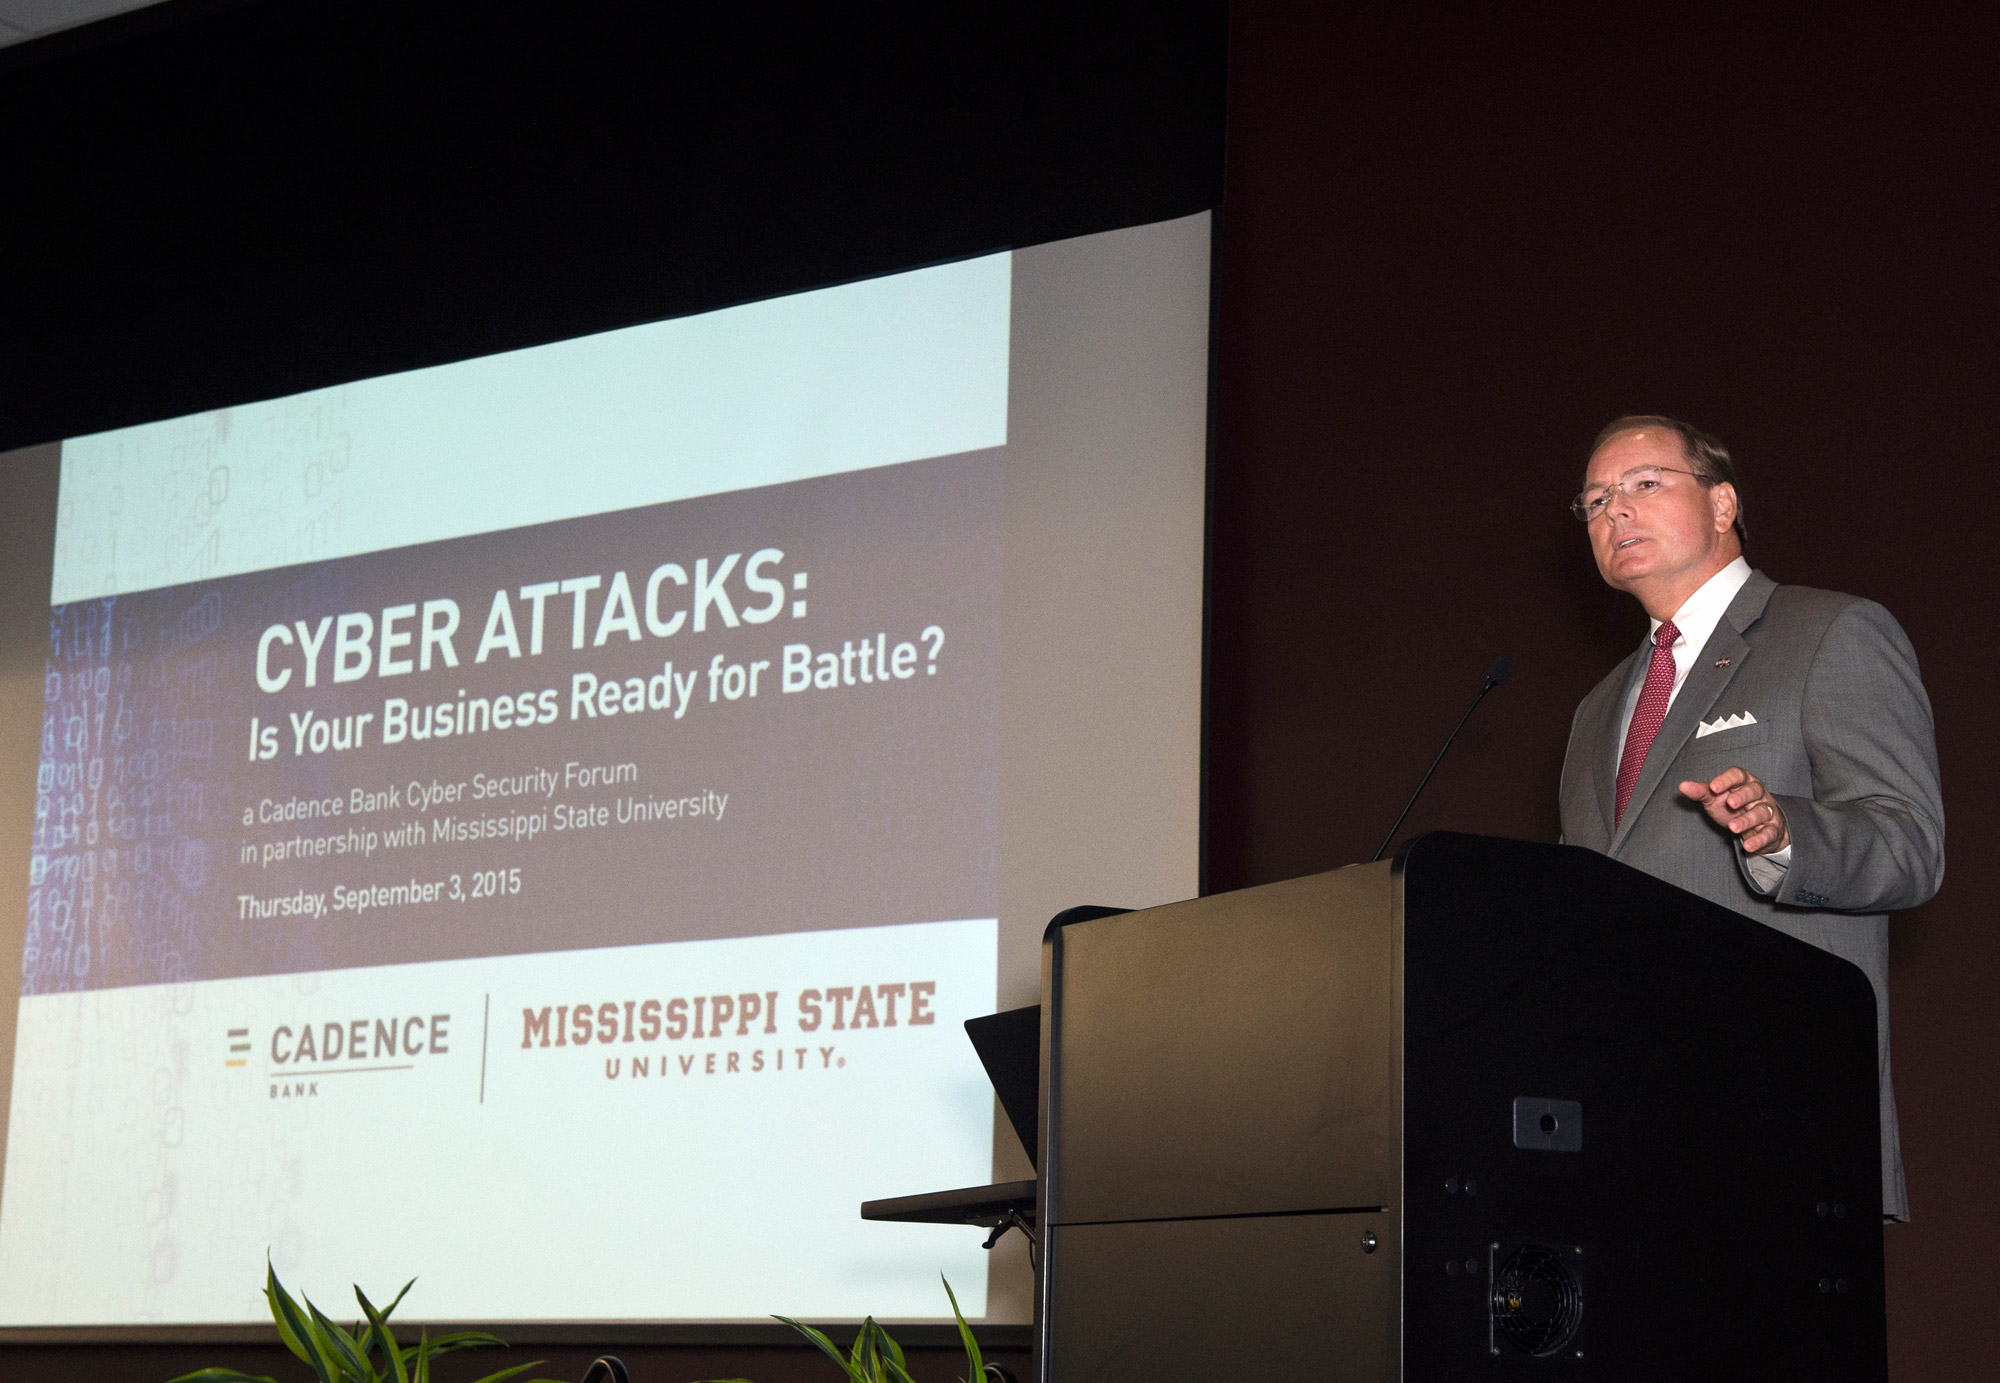 MSU President Mark E. Keenum welcomed business owners and executives to The Mill at MSU Conference Center on Thursday (Sept. 3) for the forum "Cyber Attacks: Is Your Business Ready for Battle?" The event was a partnership between the university and Cadence Bank.